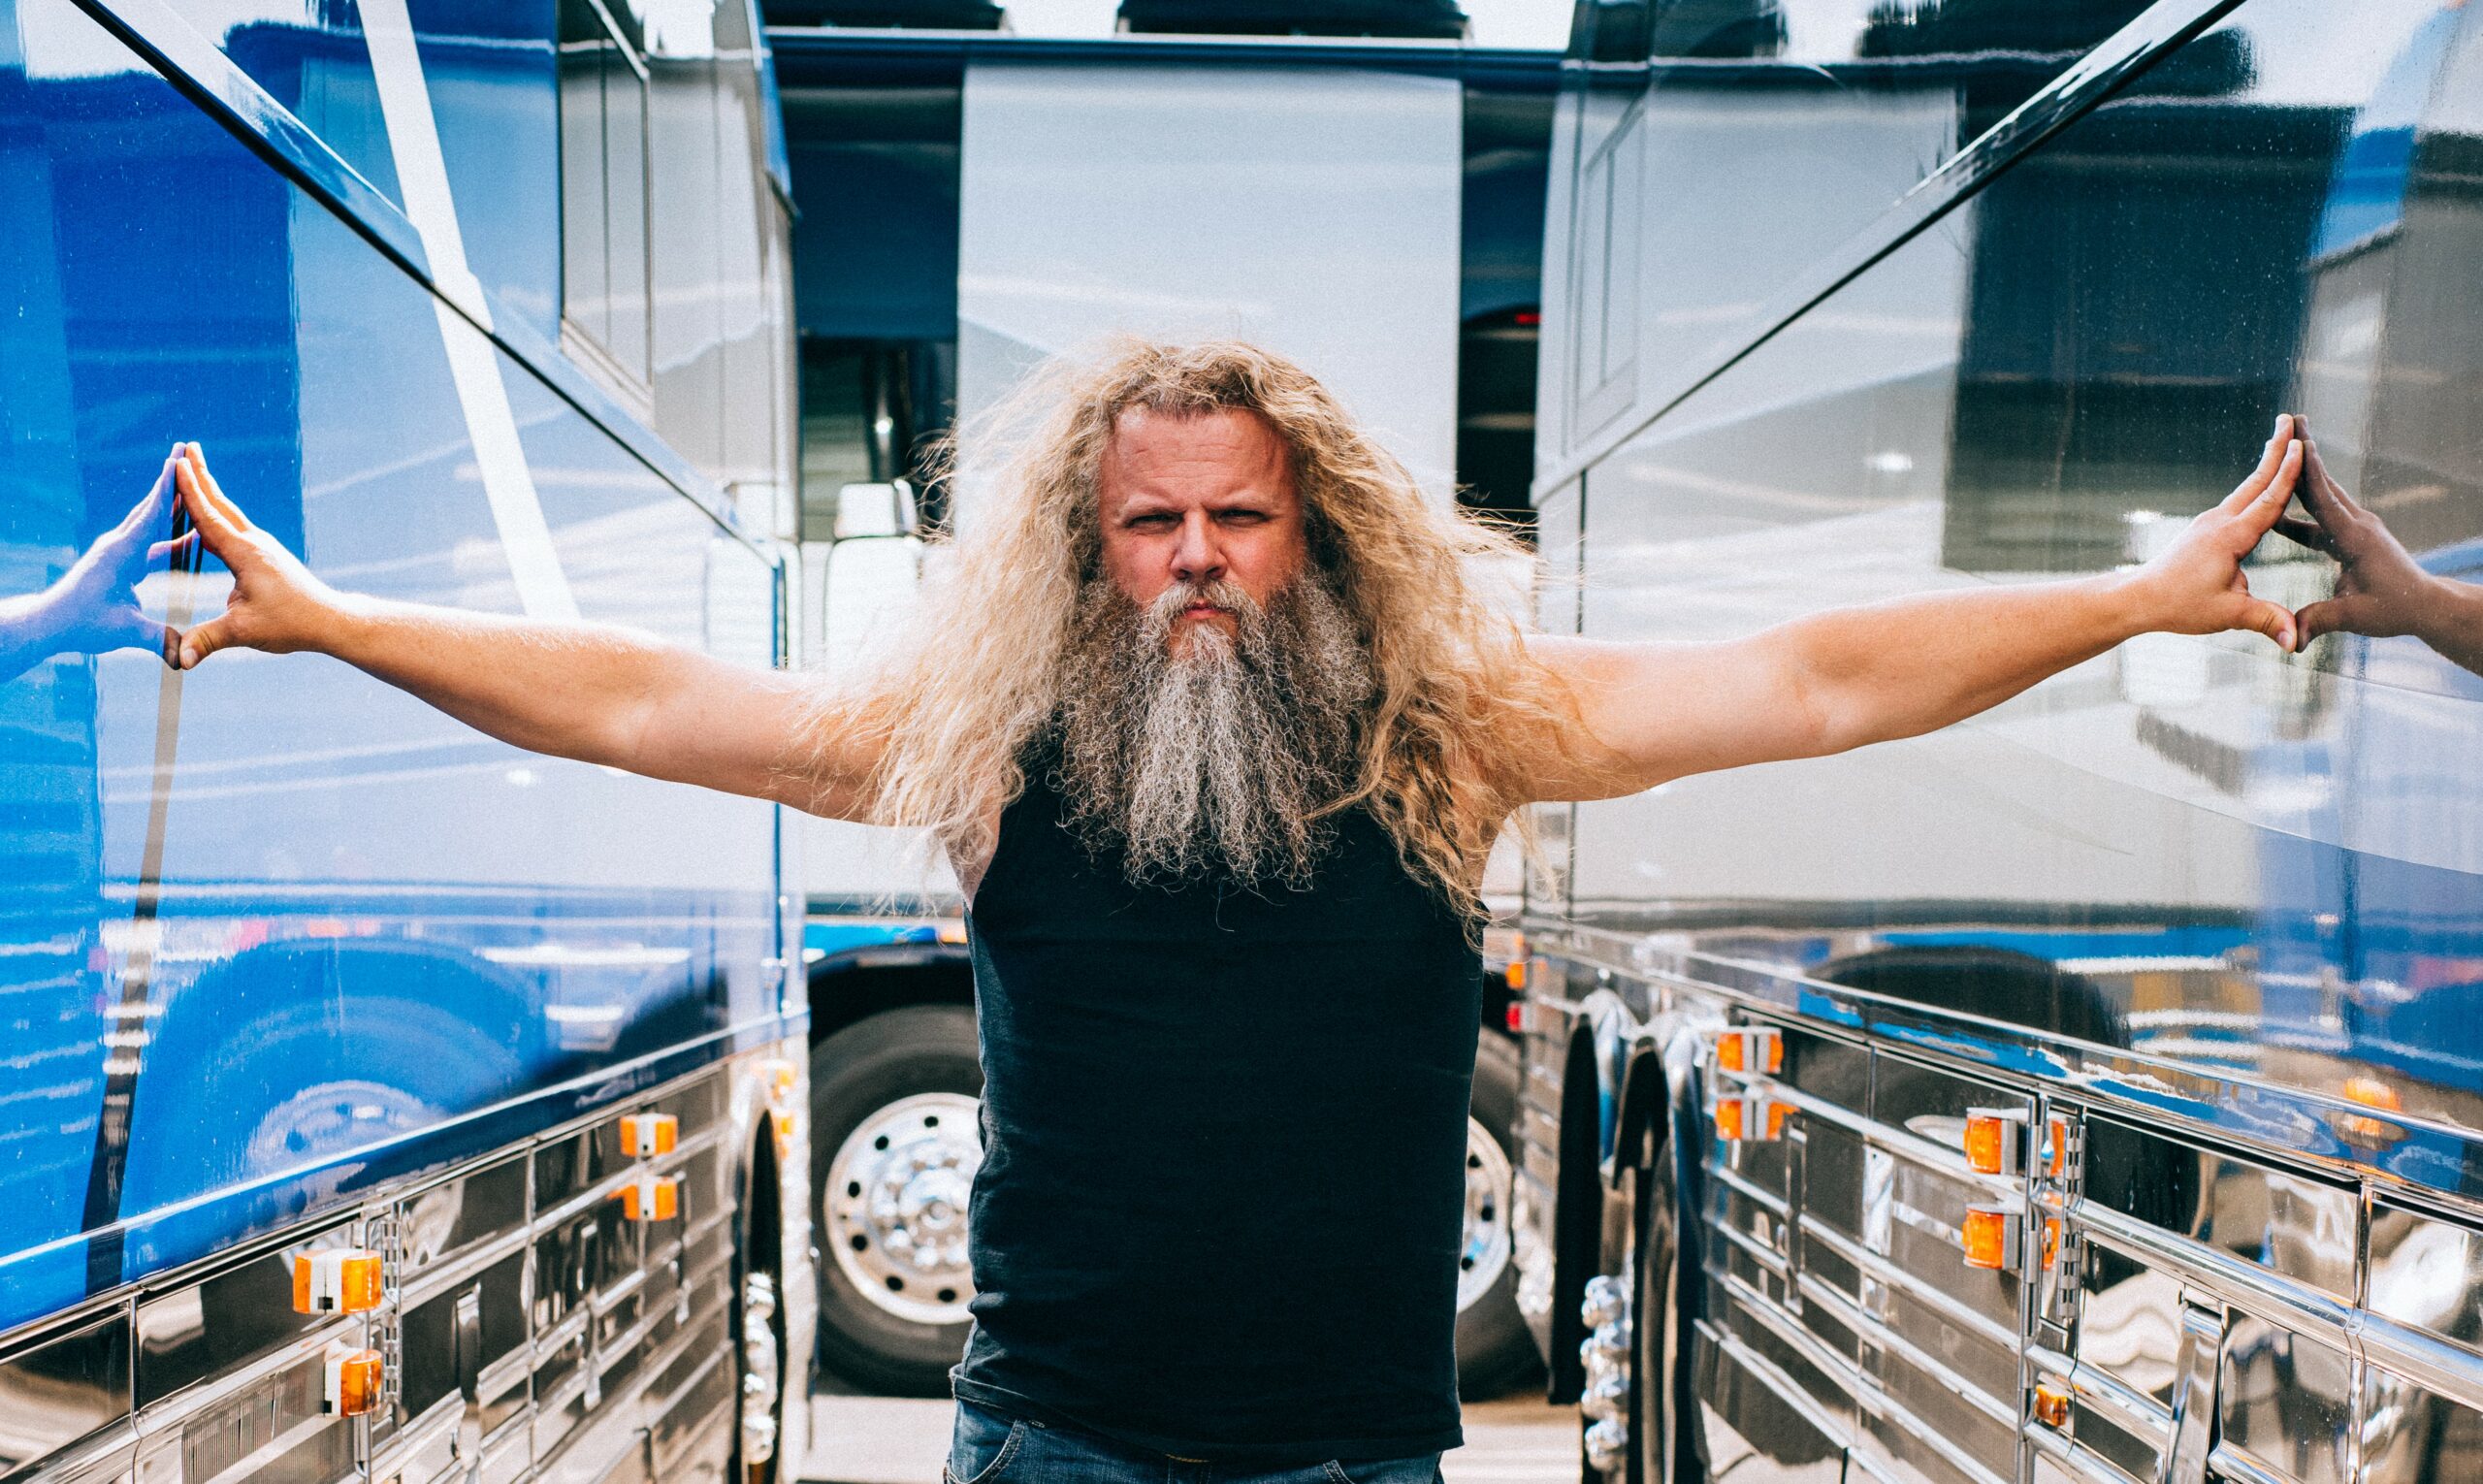 <h1 class="tribe-events-single-event-title">Jamey Johnson at Prairie Band Casino and Resort on Thursday, September 29th</h1>